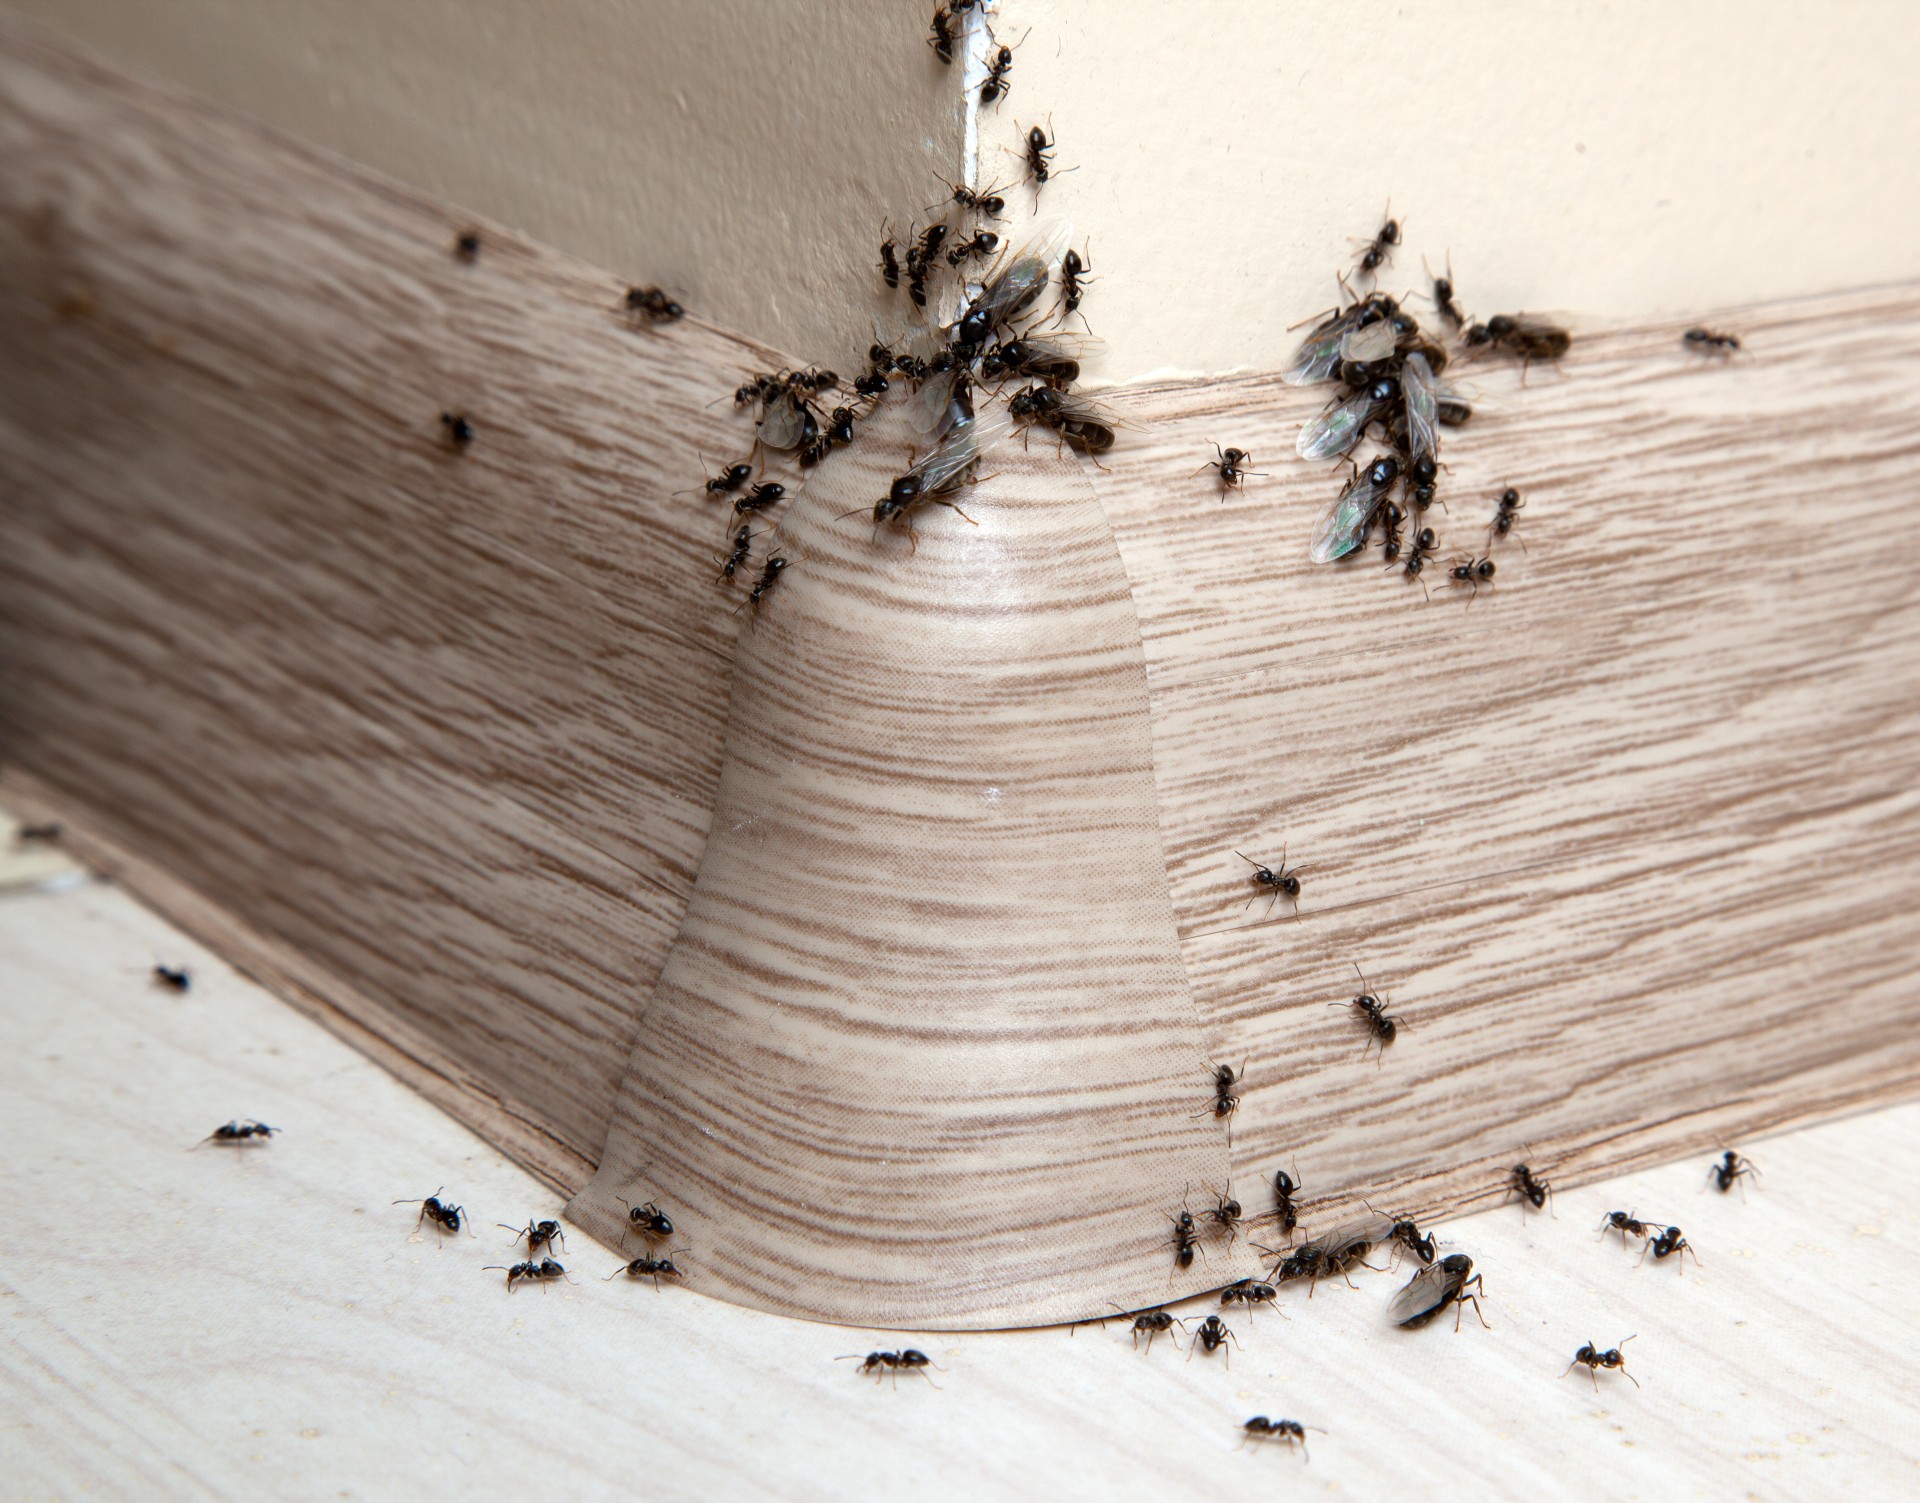 Ant Infestation, Pest Control in Potters Bar, Cuffley, Northaw, EN6. Call Now 020 8166 9746